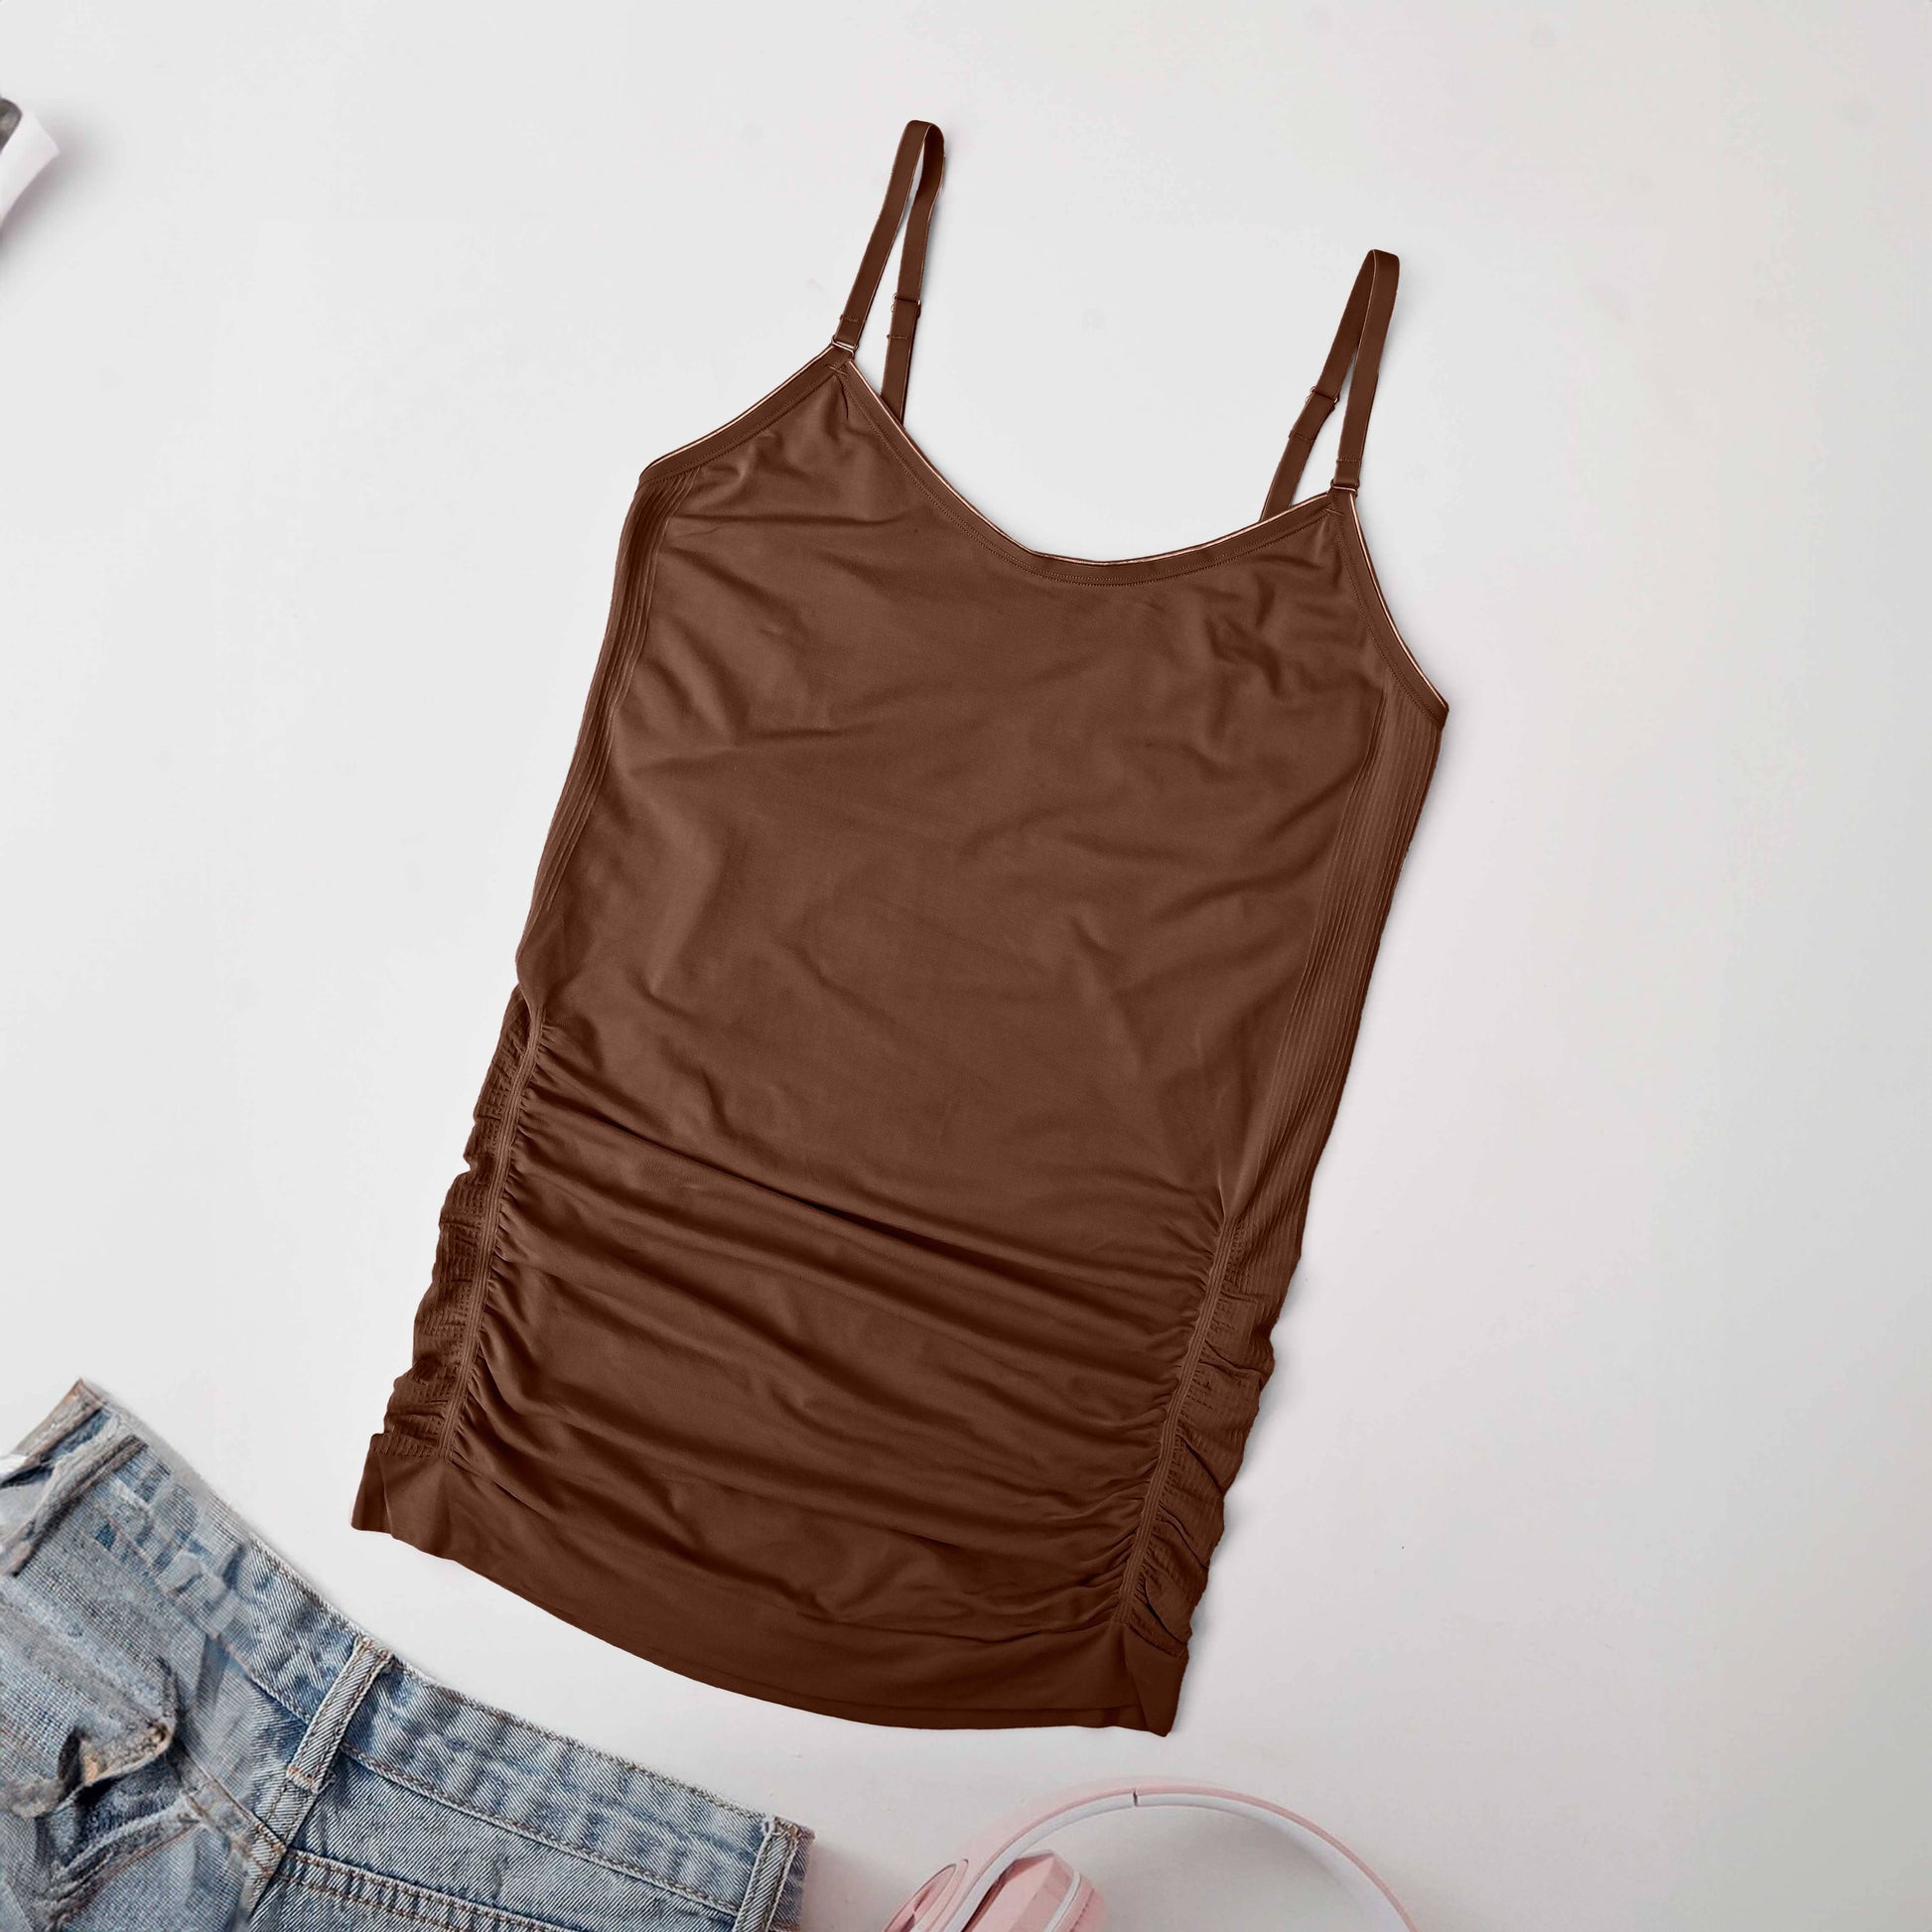 Women's Adjustable Strap Style Tank Top Women's Top SRL Chocolate M (18-20) Inches 